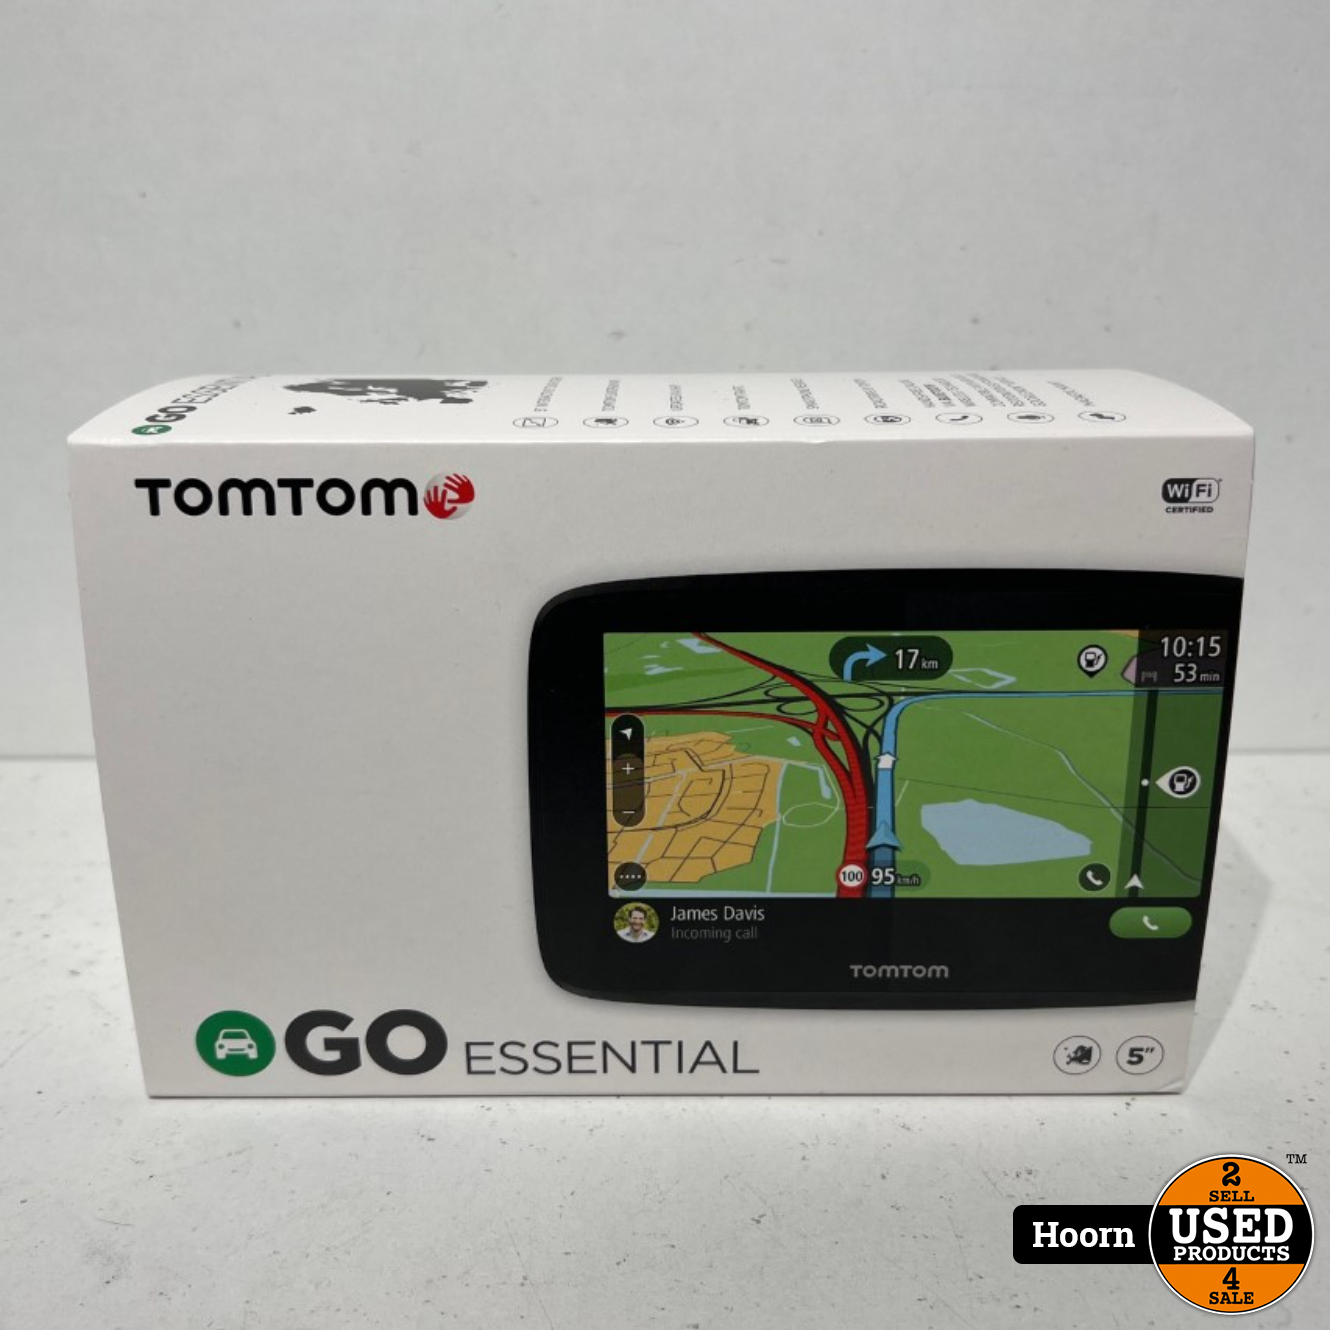 Uitwisseling Leger de ober TOMTOM GO Essential 5 - Used Products Hoorn